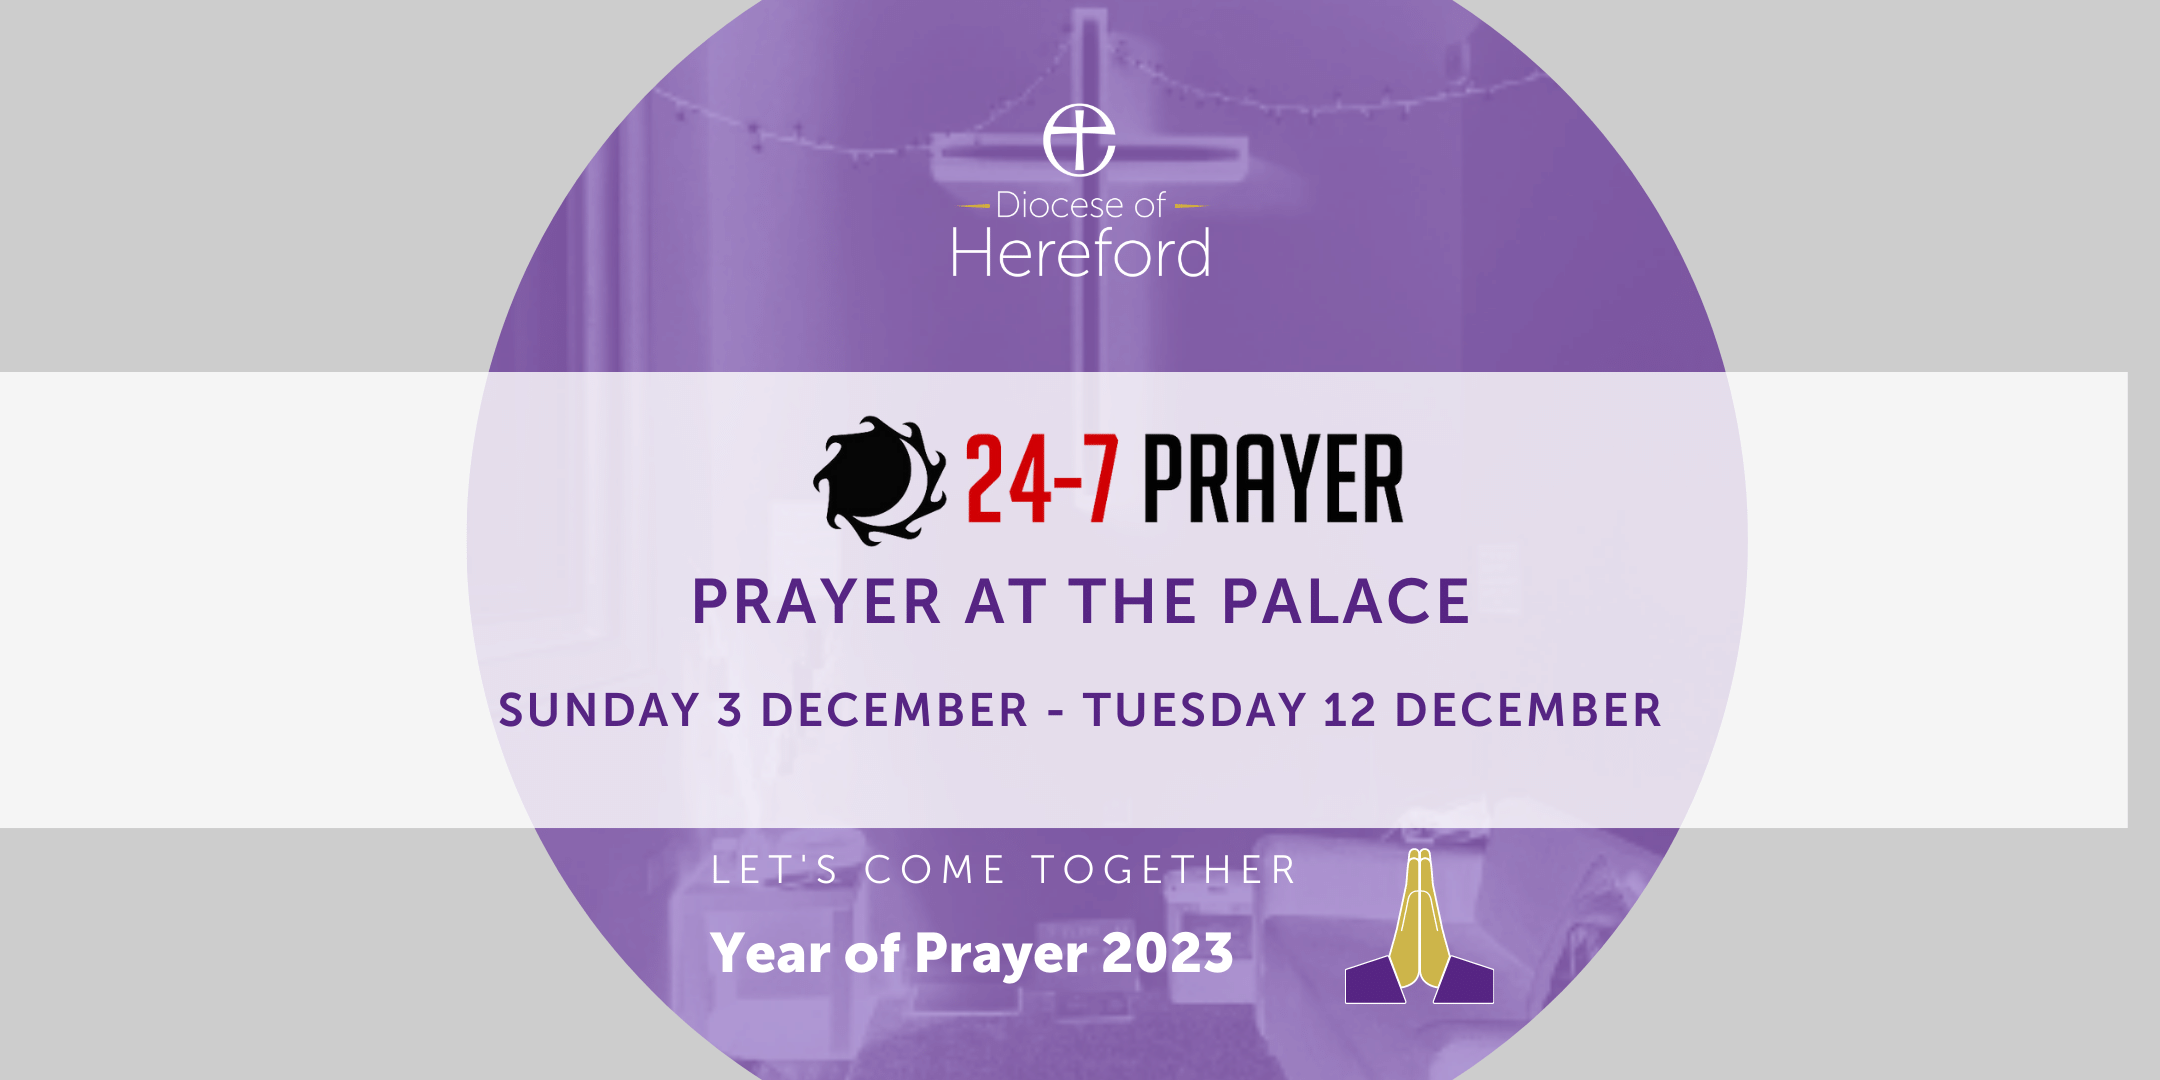 Event invitation to 24hour prayer chain event at the Palace, Hereford